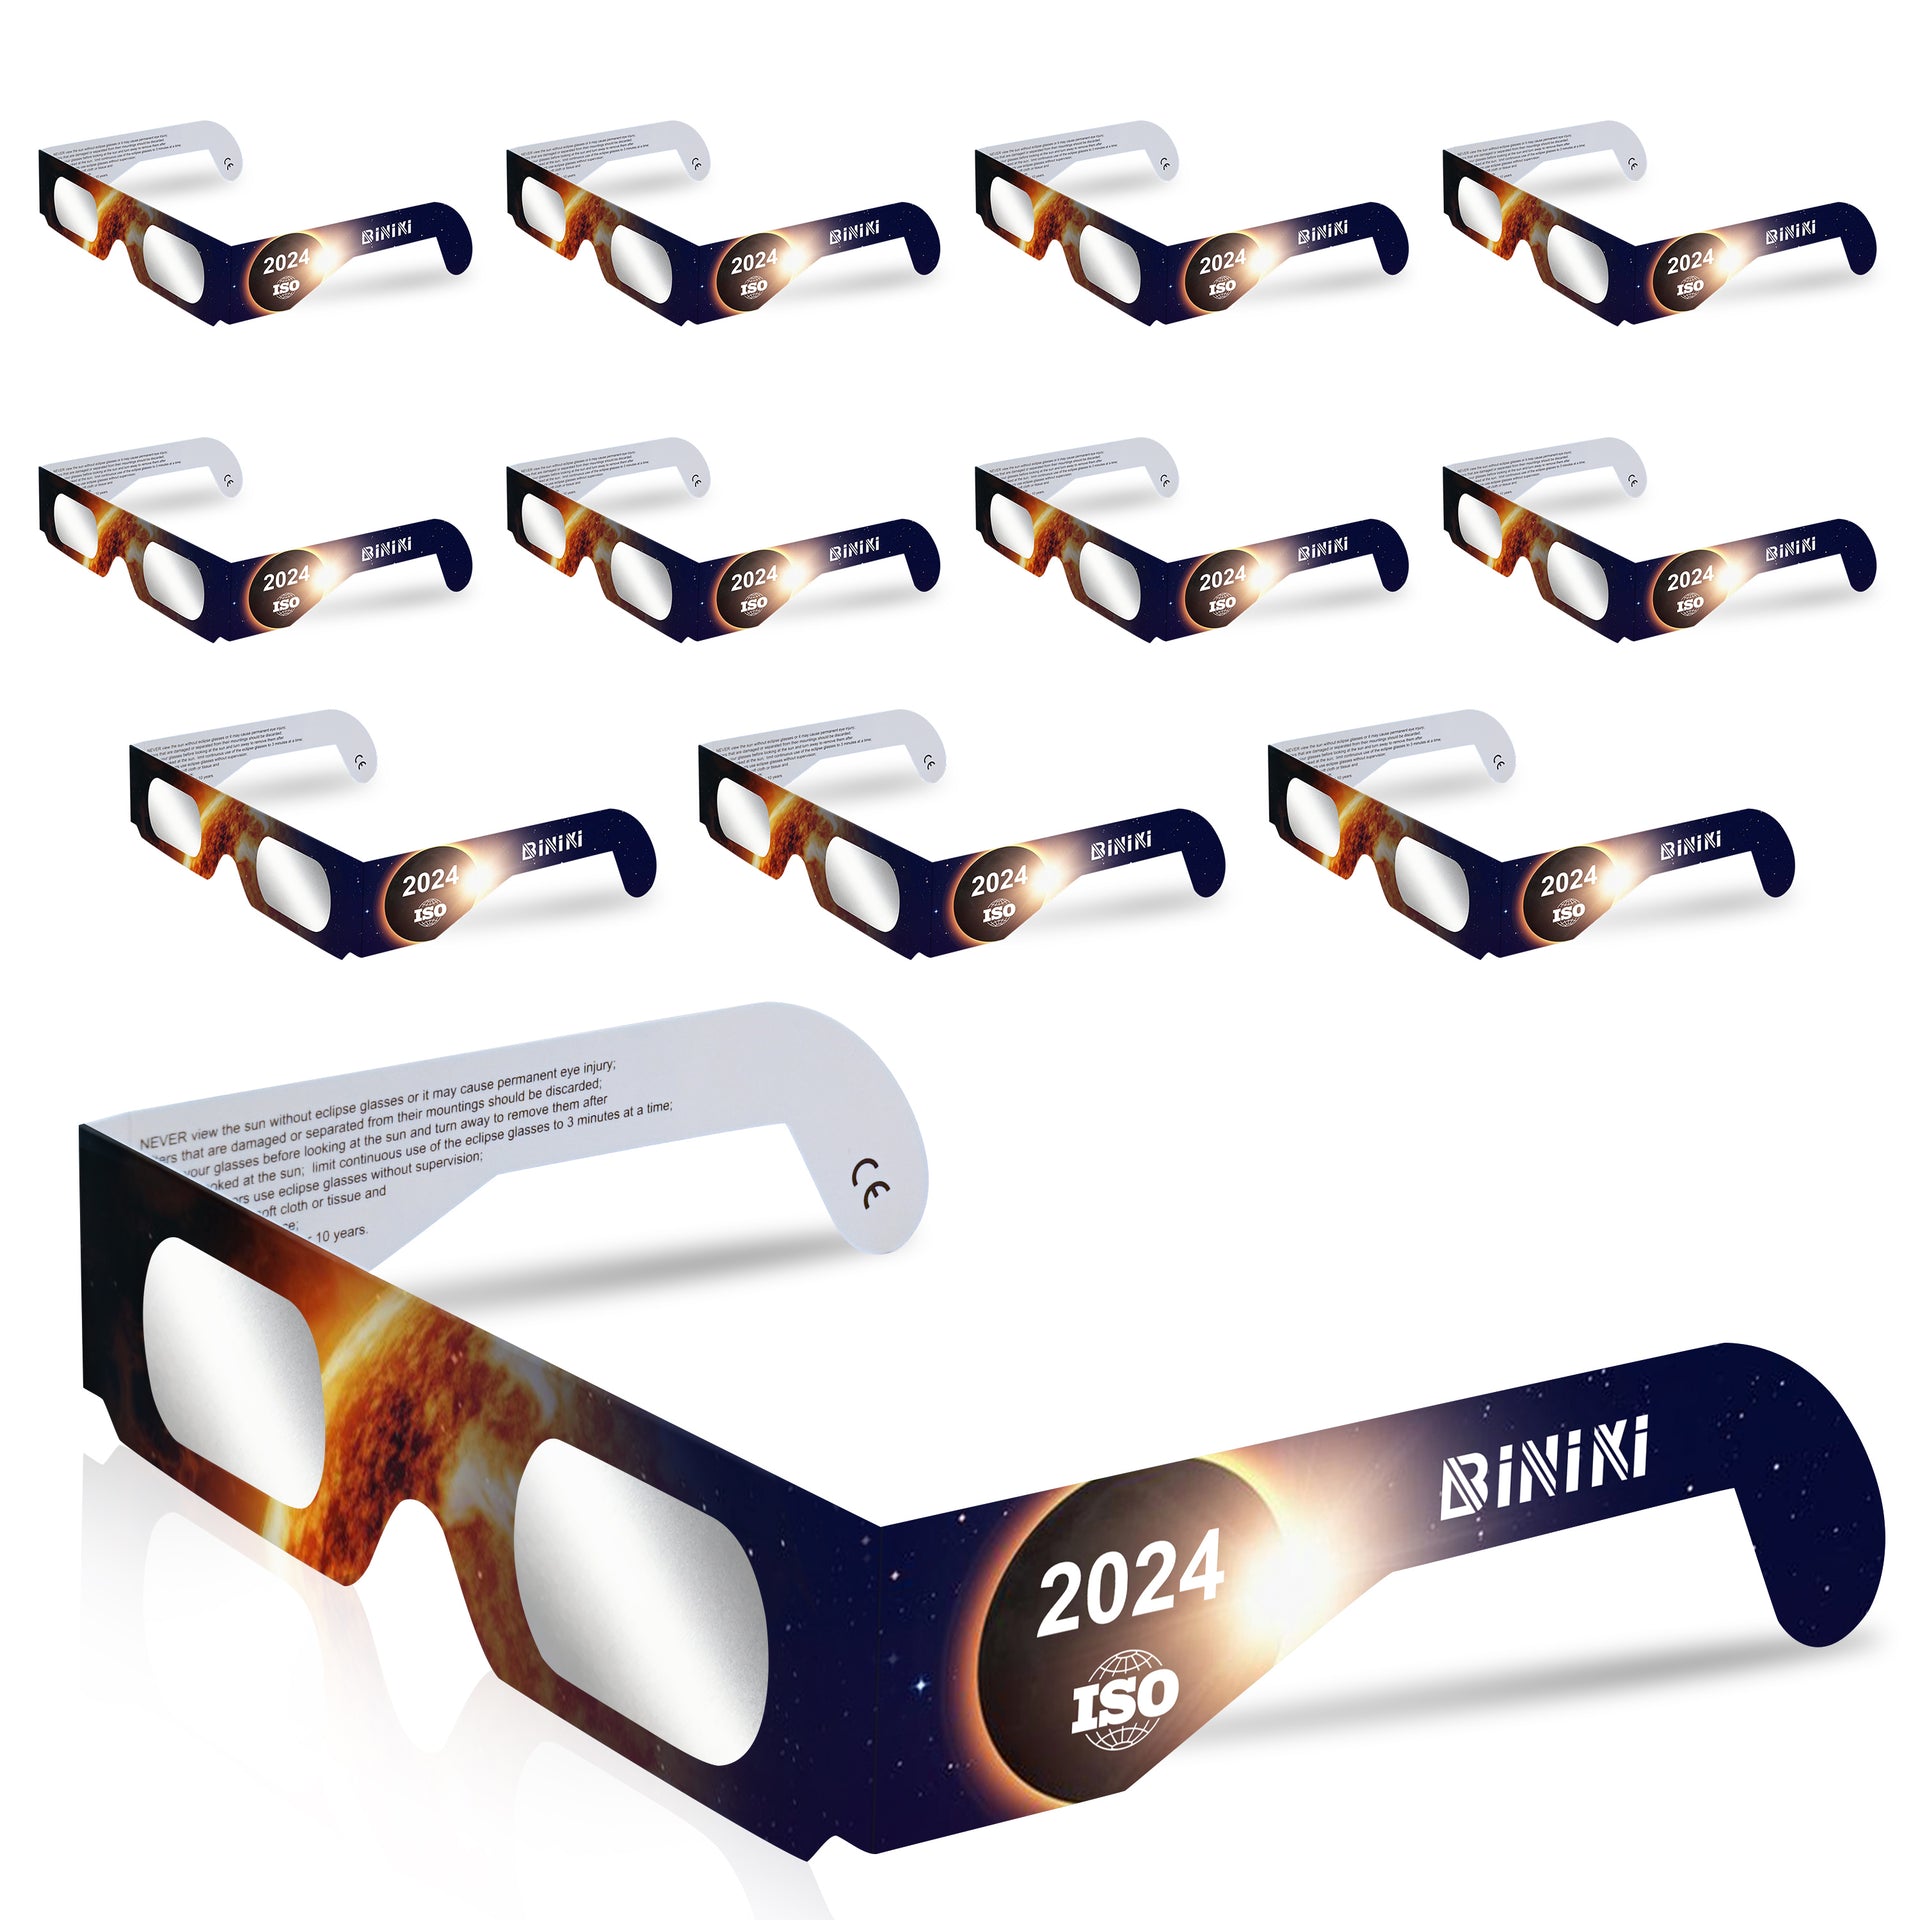 Biniki Solar Eclipse Glasses 2024 - CE & ISO Certified Safe Shades for